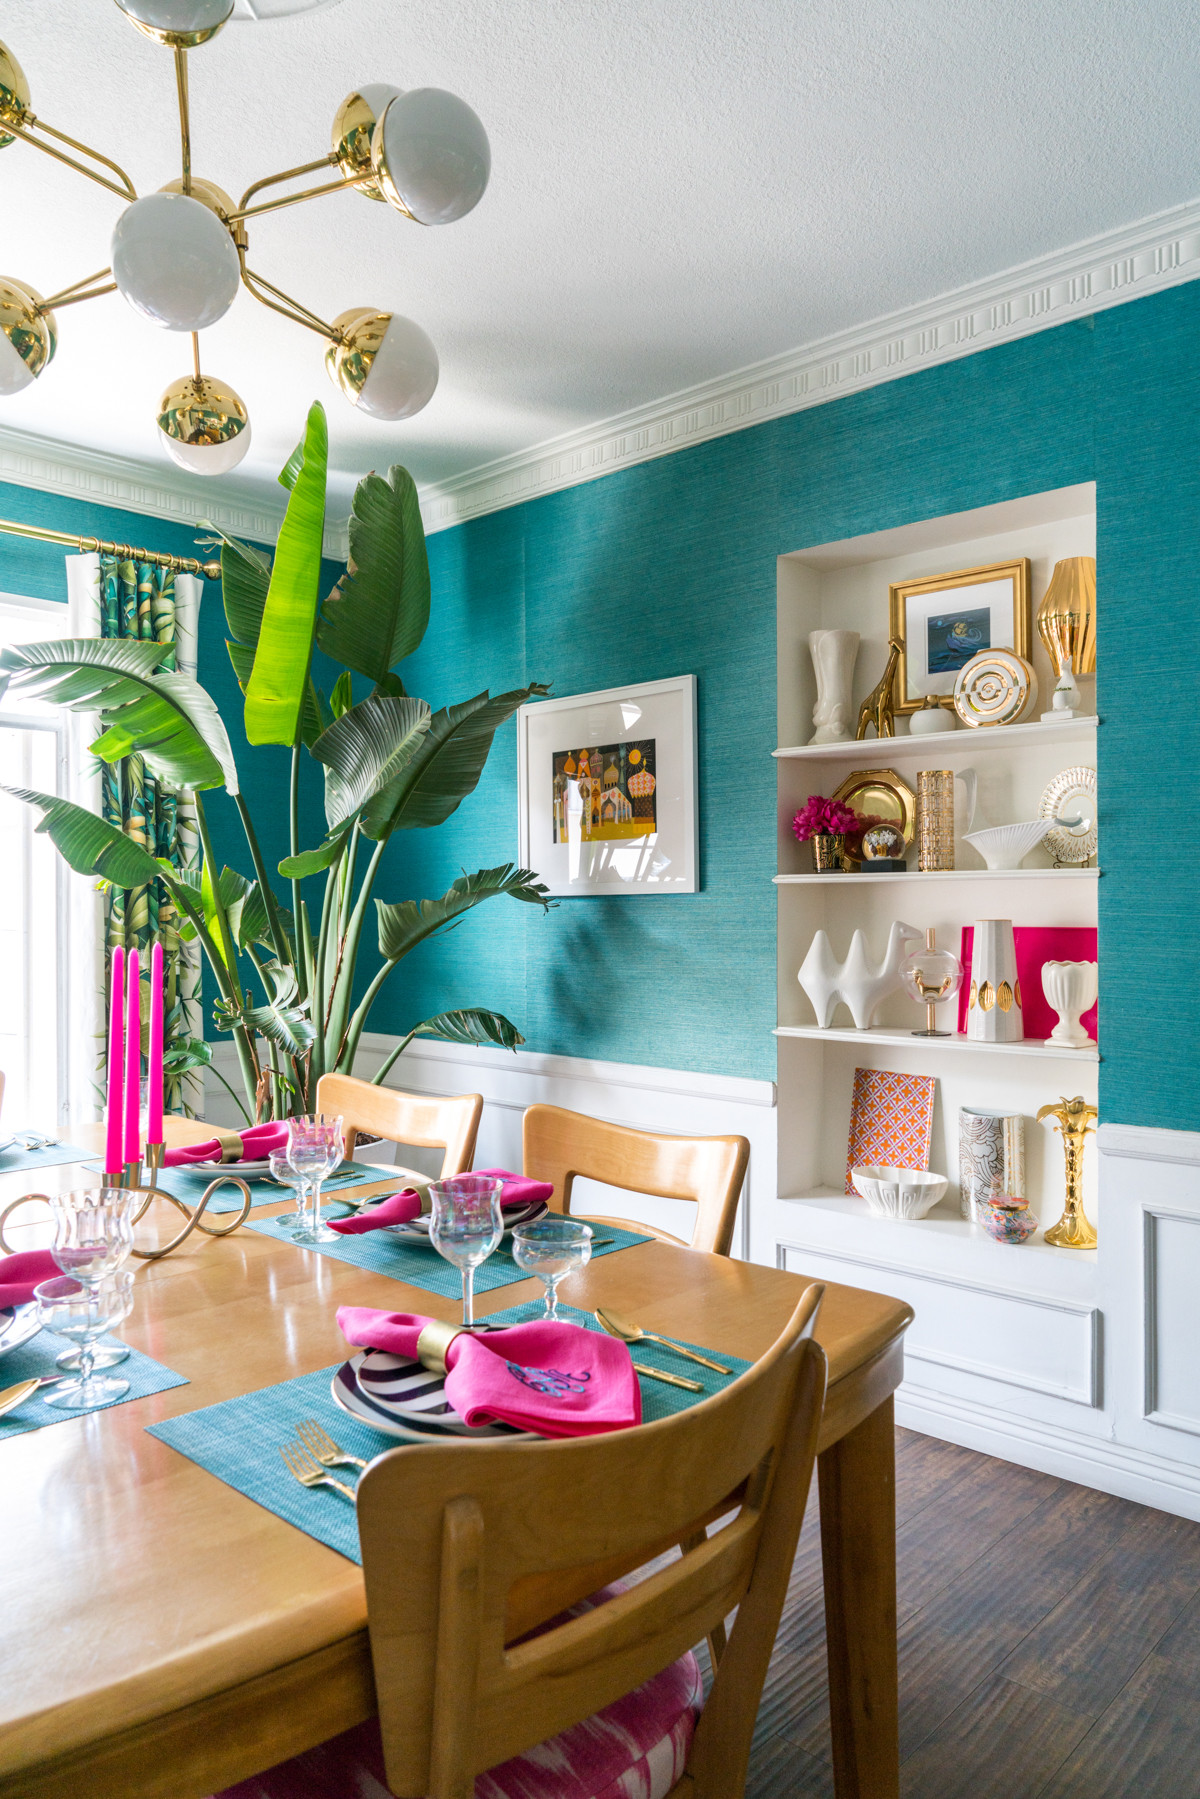 75 Beautiful Small Dining Room Pictures & Ideas | Houzz